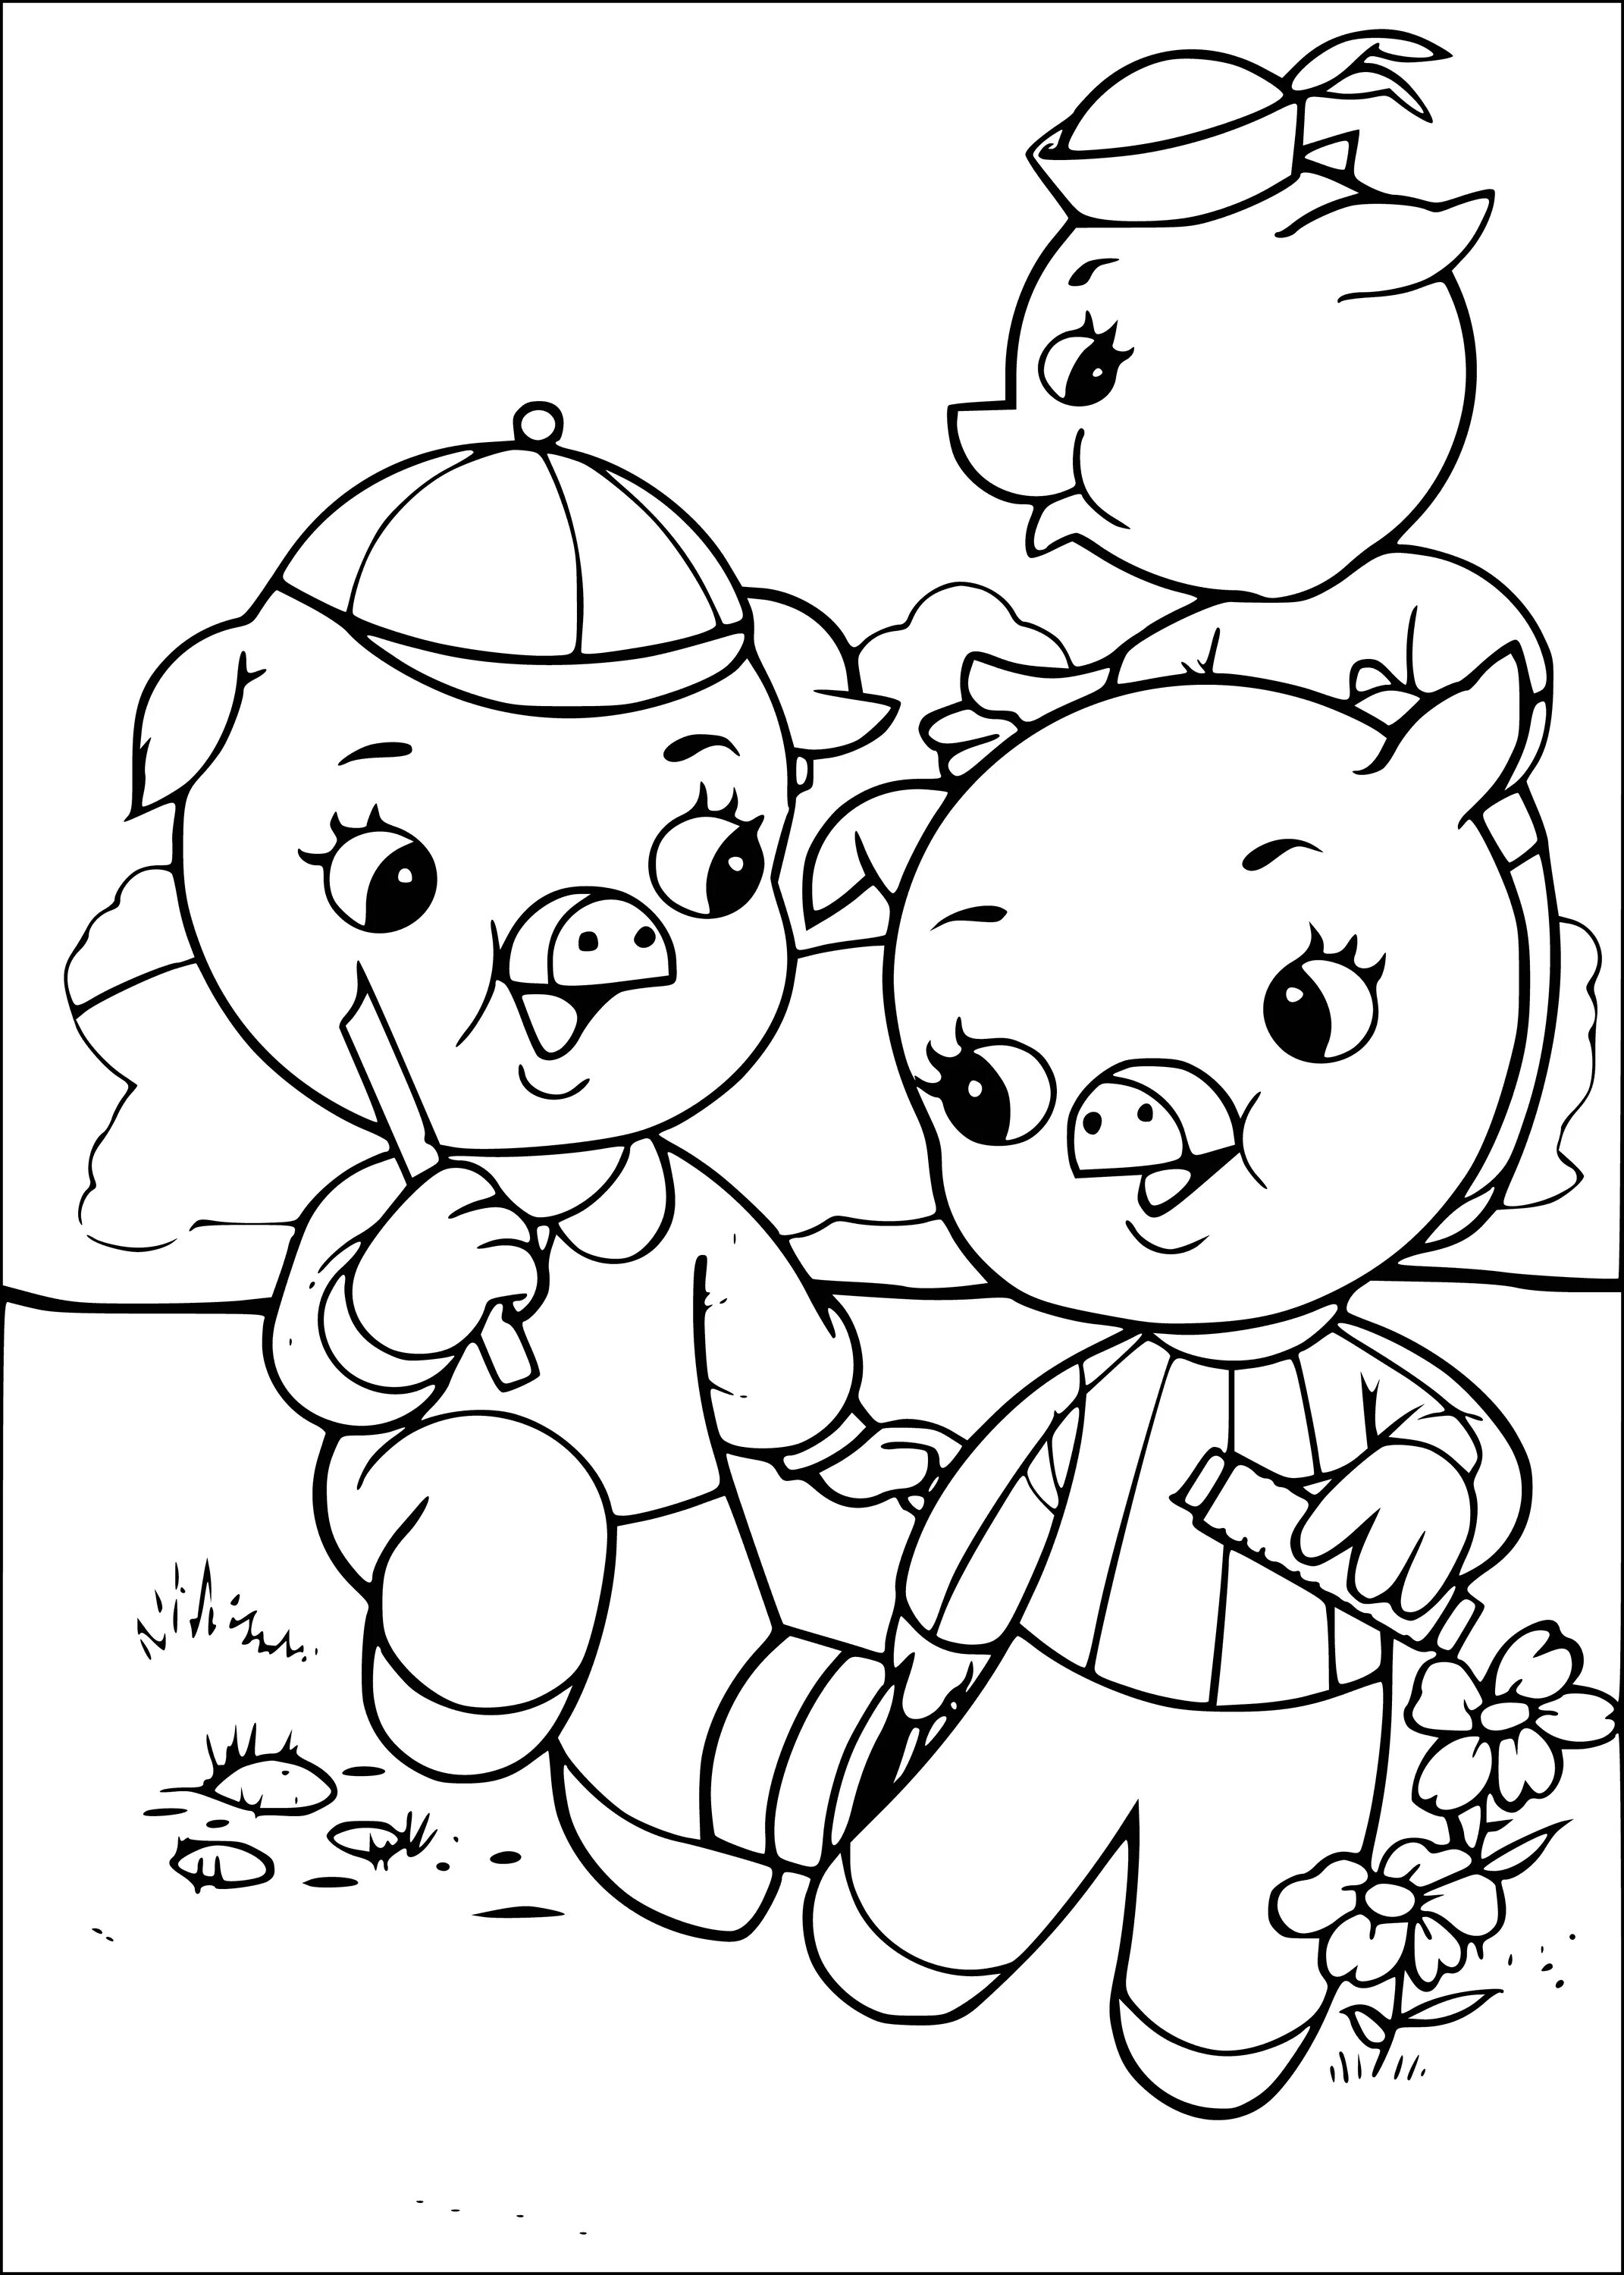 3 Pigs Anniversary coloring pages for kids